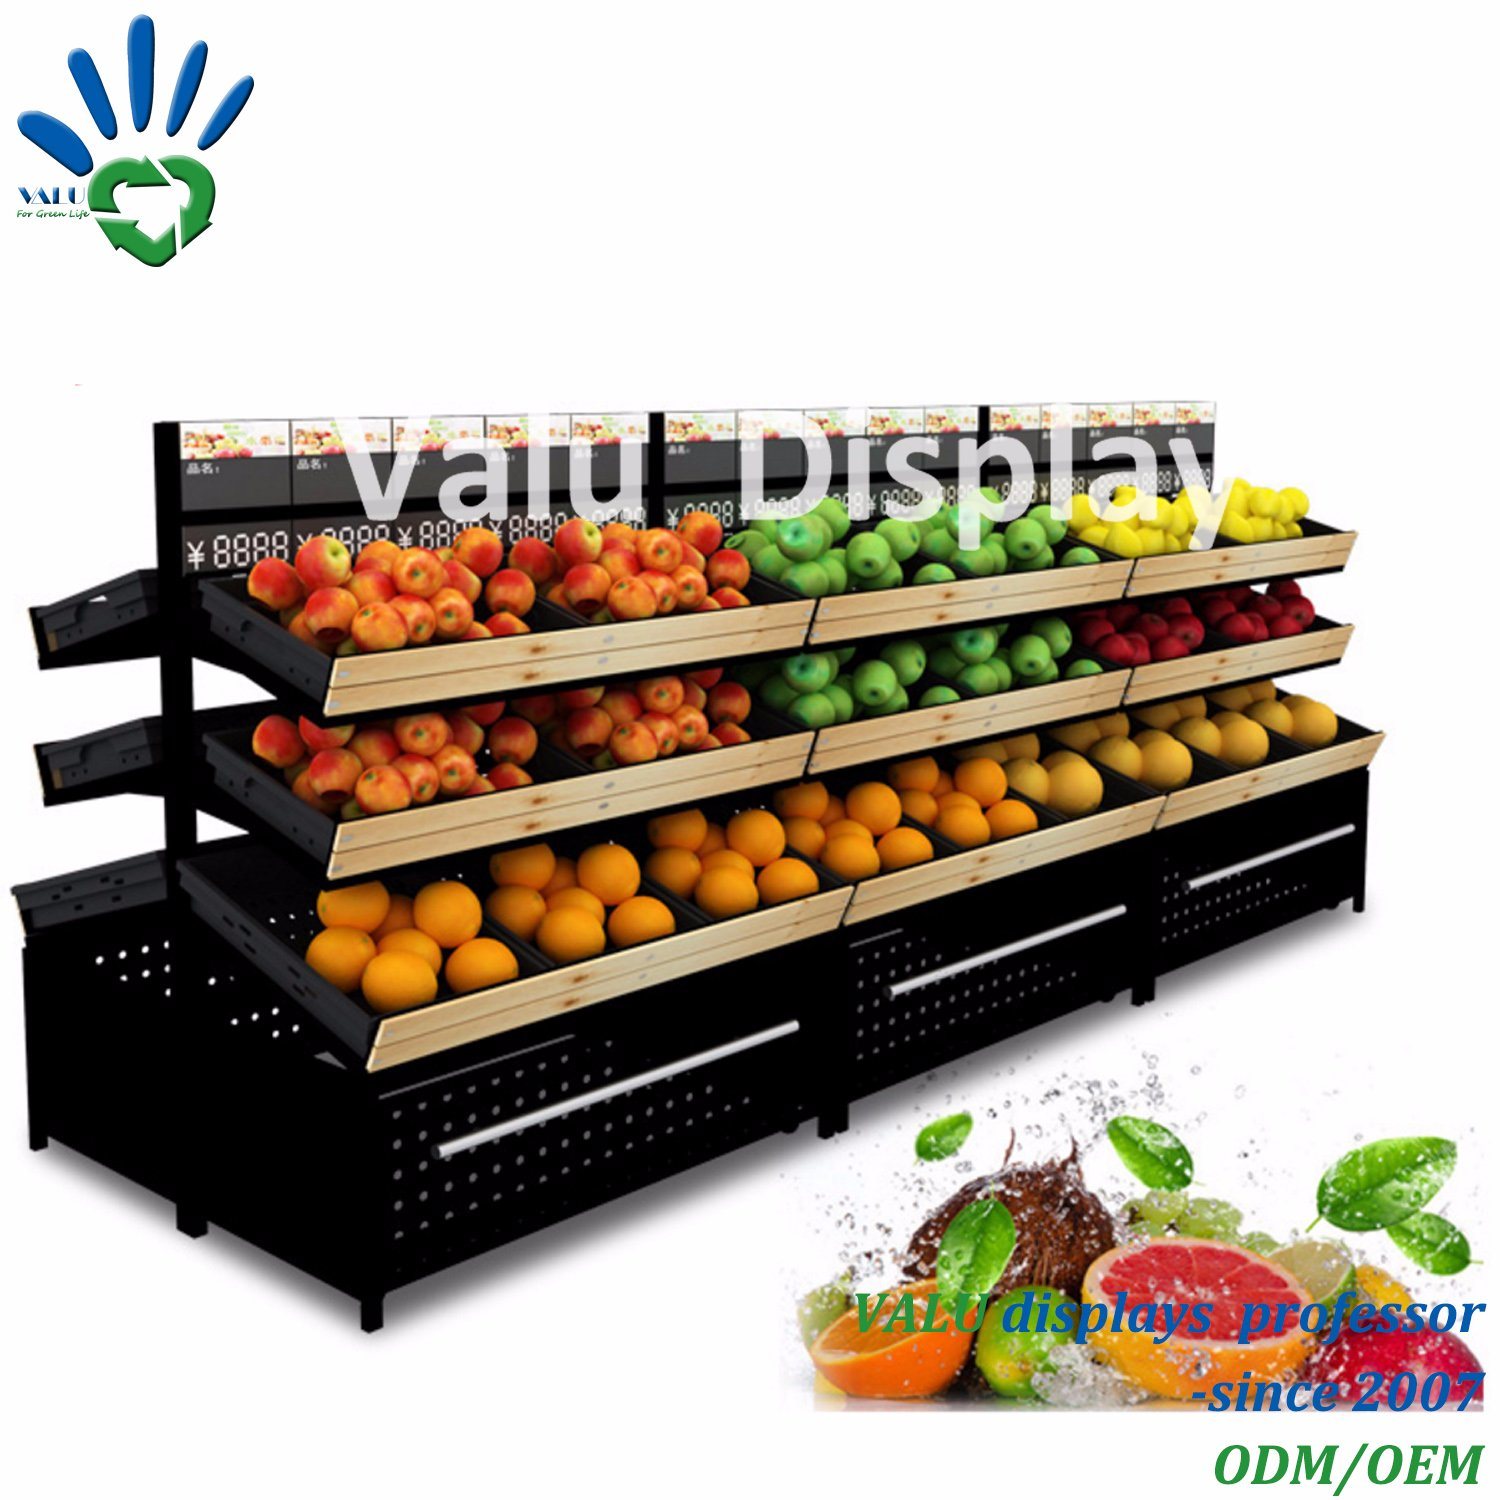 Supermarket Three Tiers Storage Display Stand Shelf Rack for Fruits and Vegetables (VMS907)